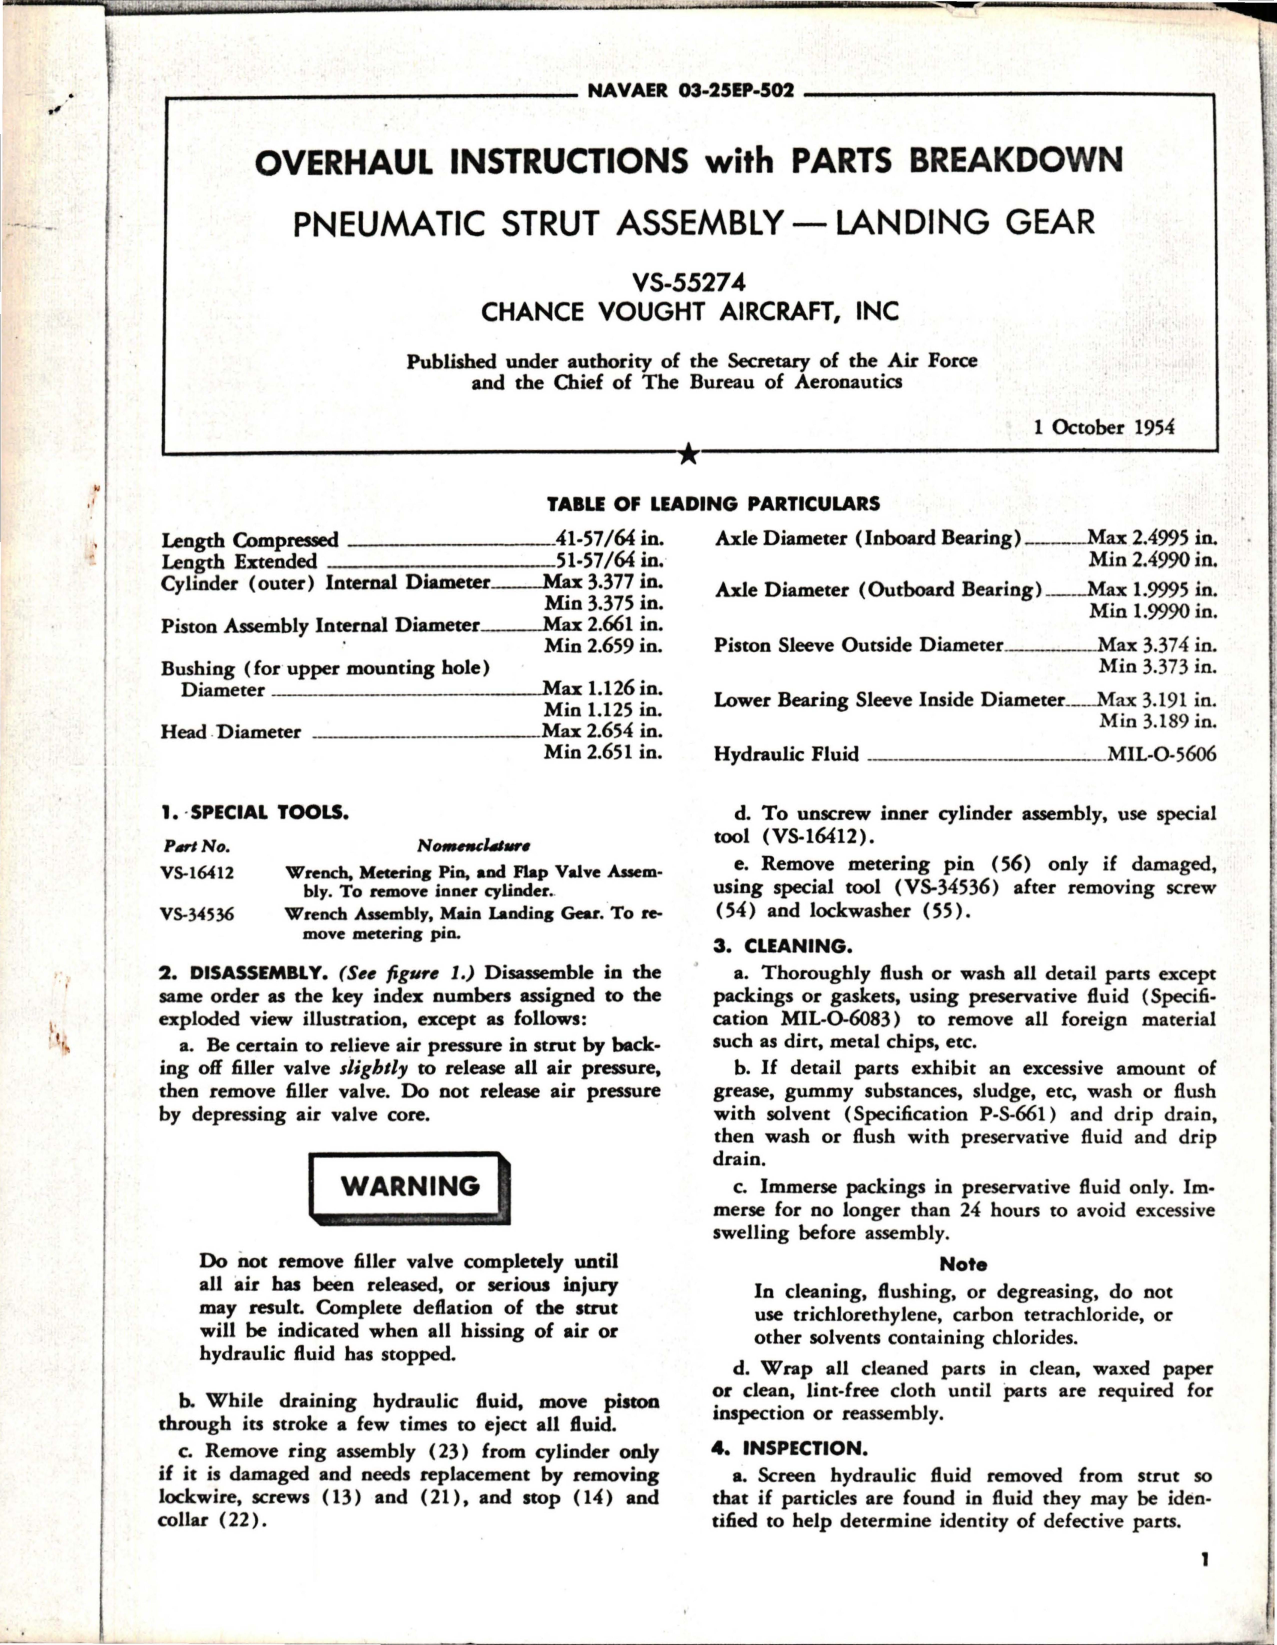 Sample page 1 from AirCorps Library document: Overhaul Instructions with Parts Breakdown for Pneumatic Strut Assembly - Landing Gear - VS-55274